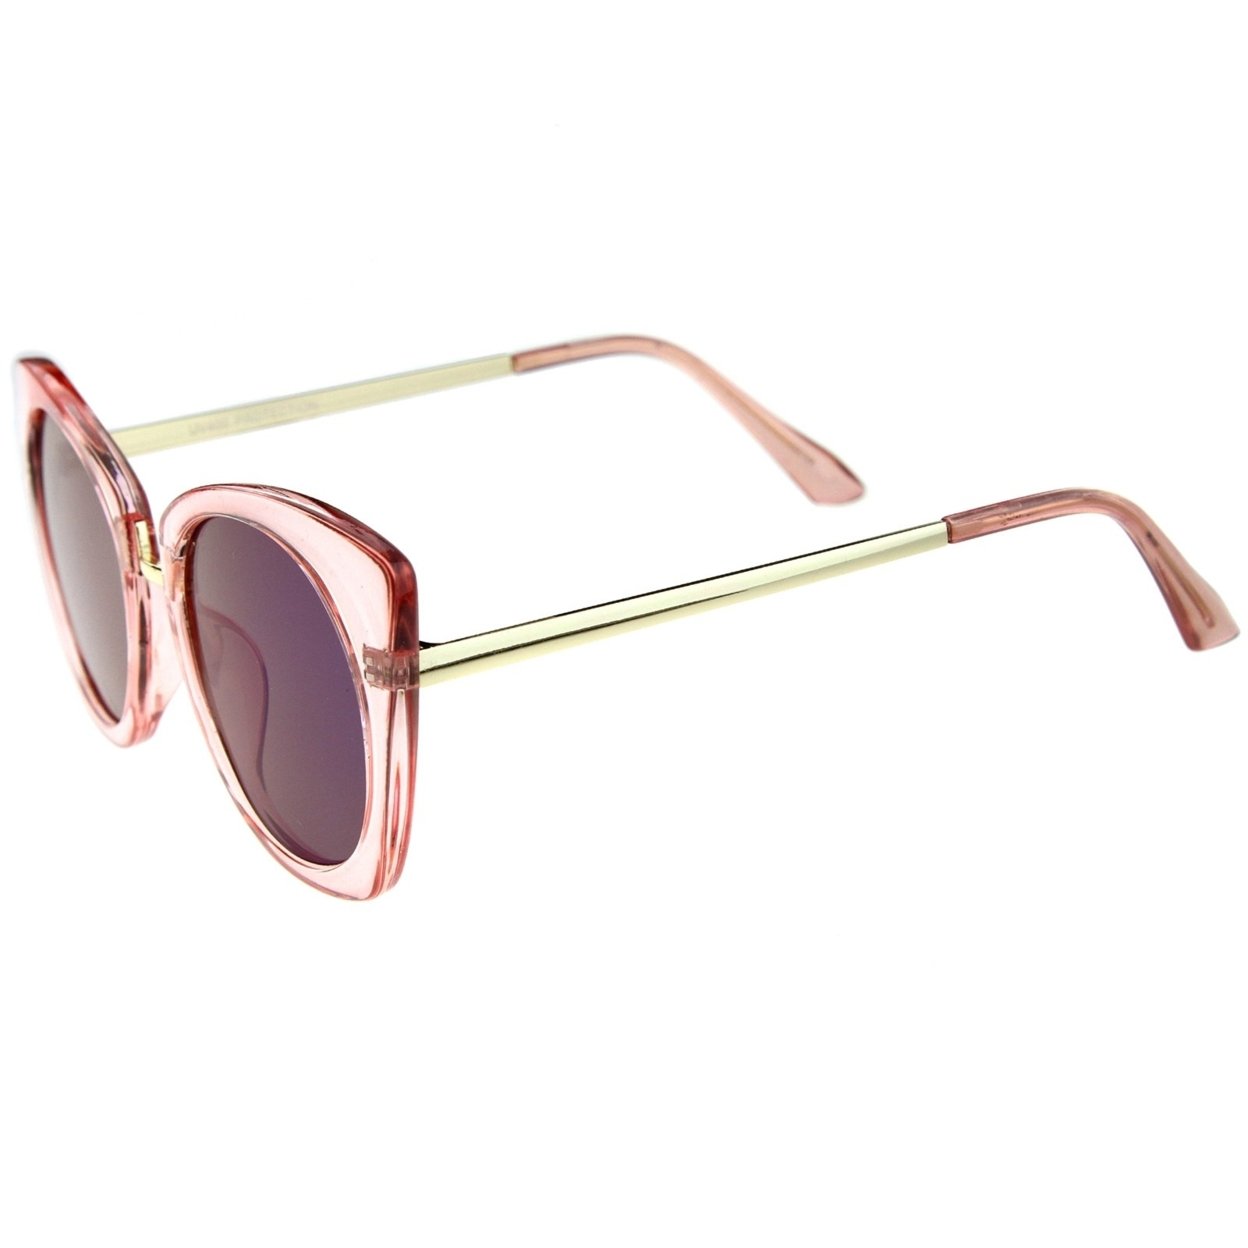 Women's Crystal Frame Colored Mirror Flat Lens Round Cat Eye Sunglasses 52mm - Pink-Gold / Blue Mirror